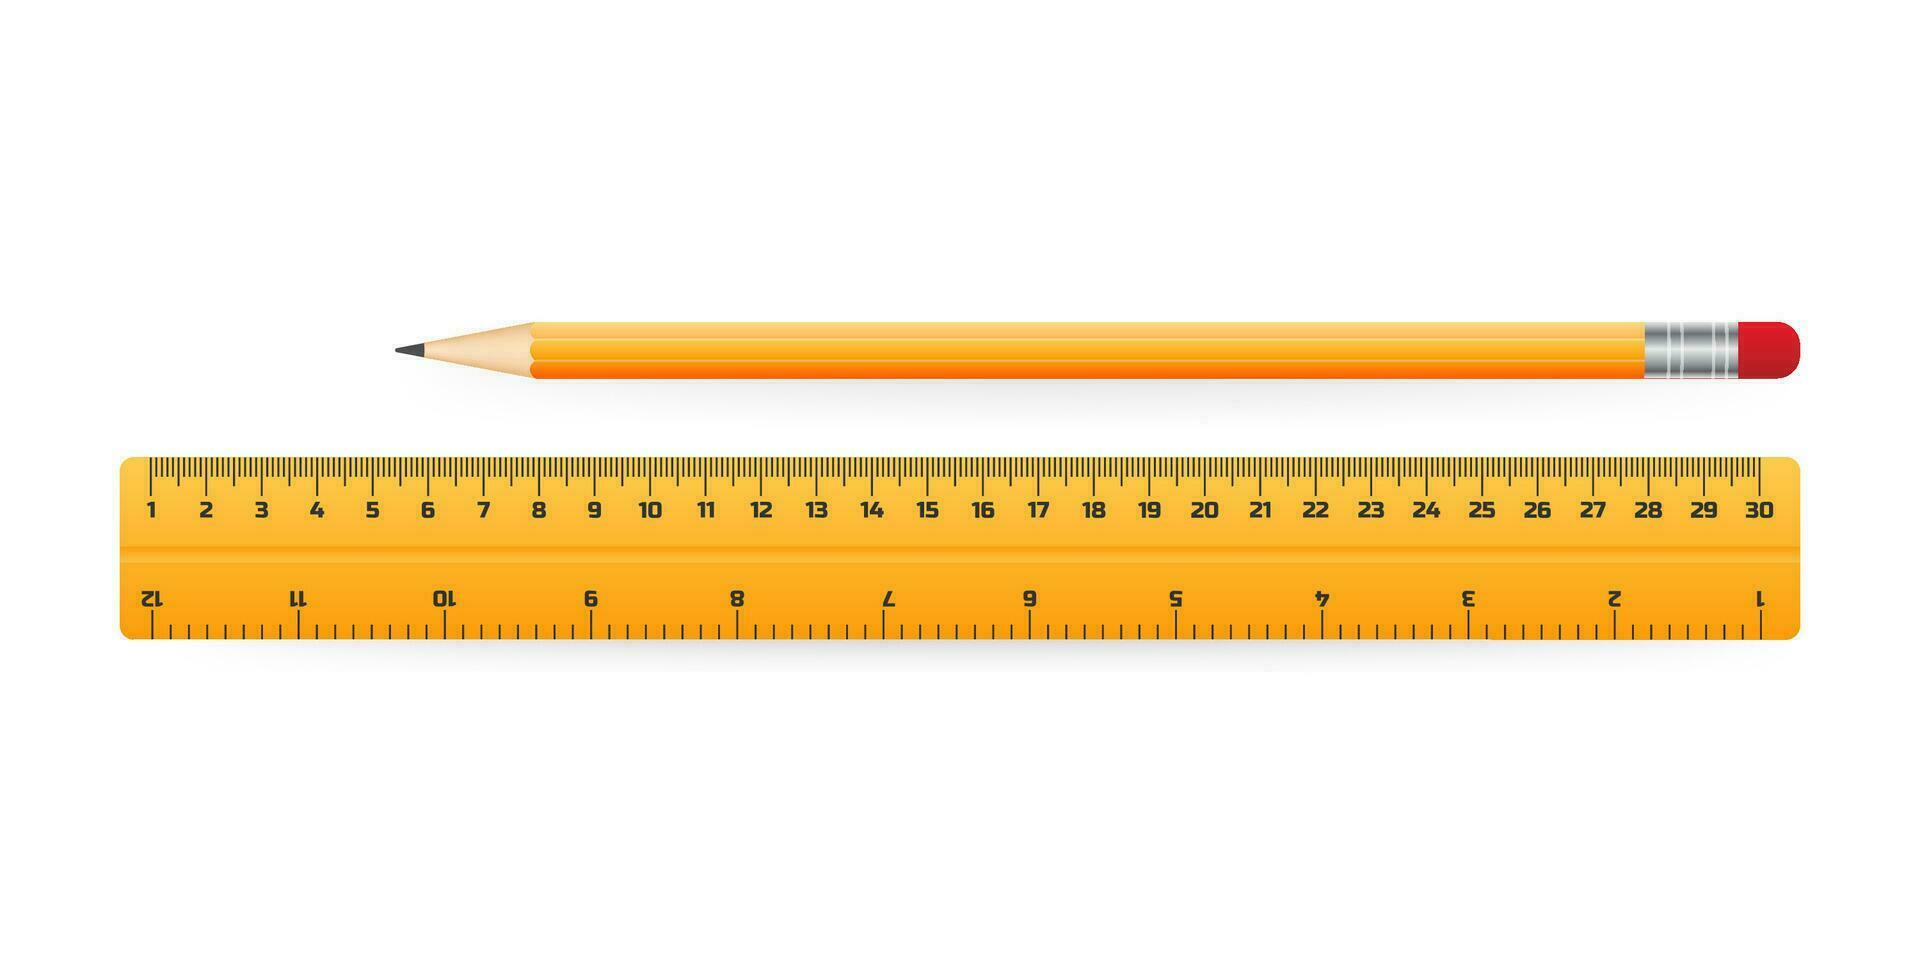 Pencil with ruler icon school symbol education illustration drawing. Vector stock illustration.